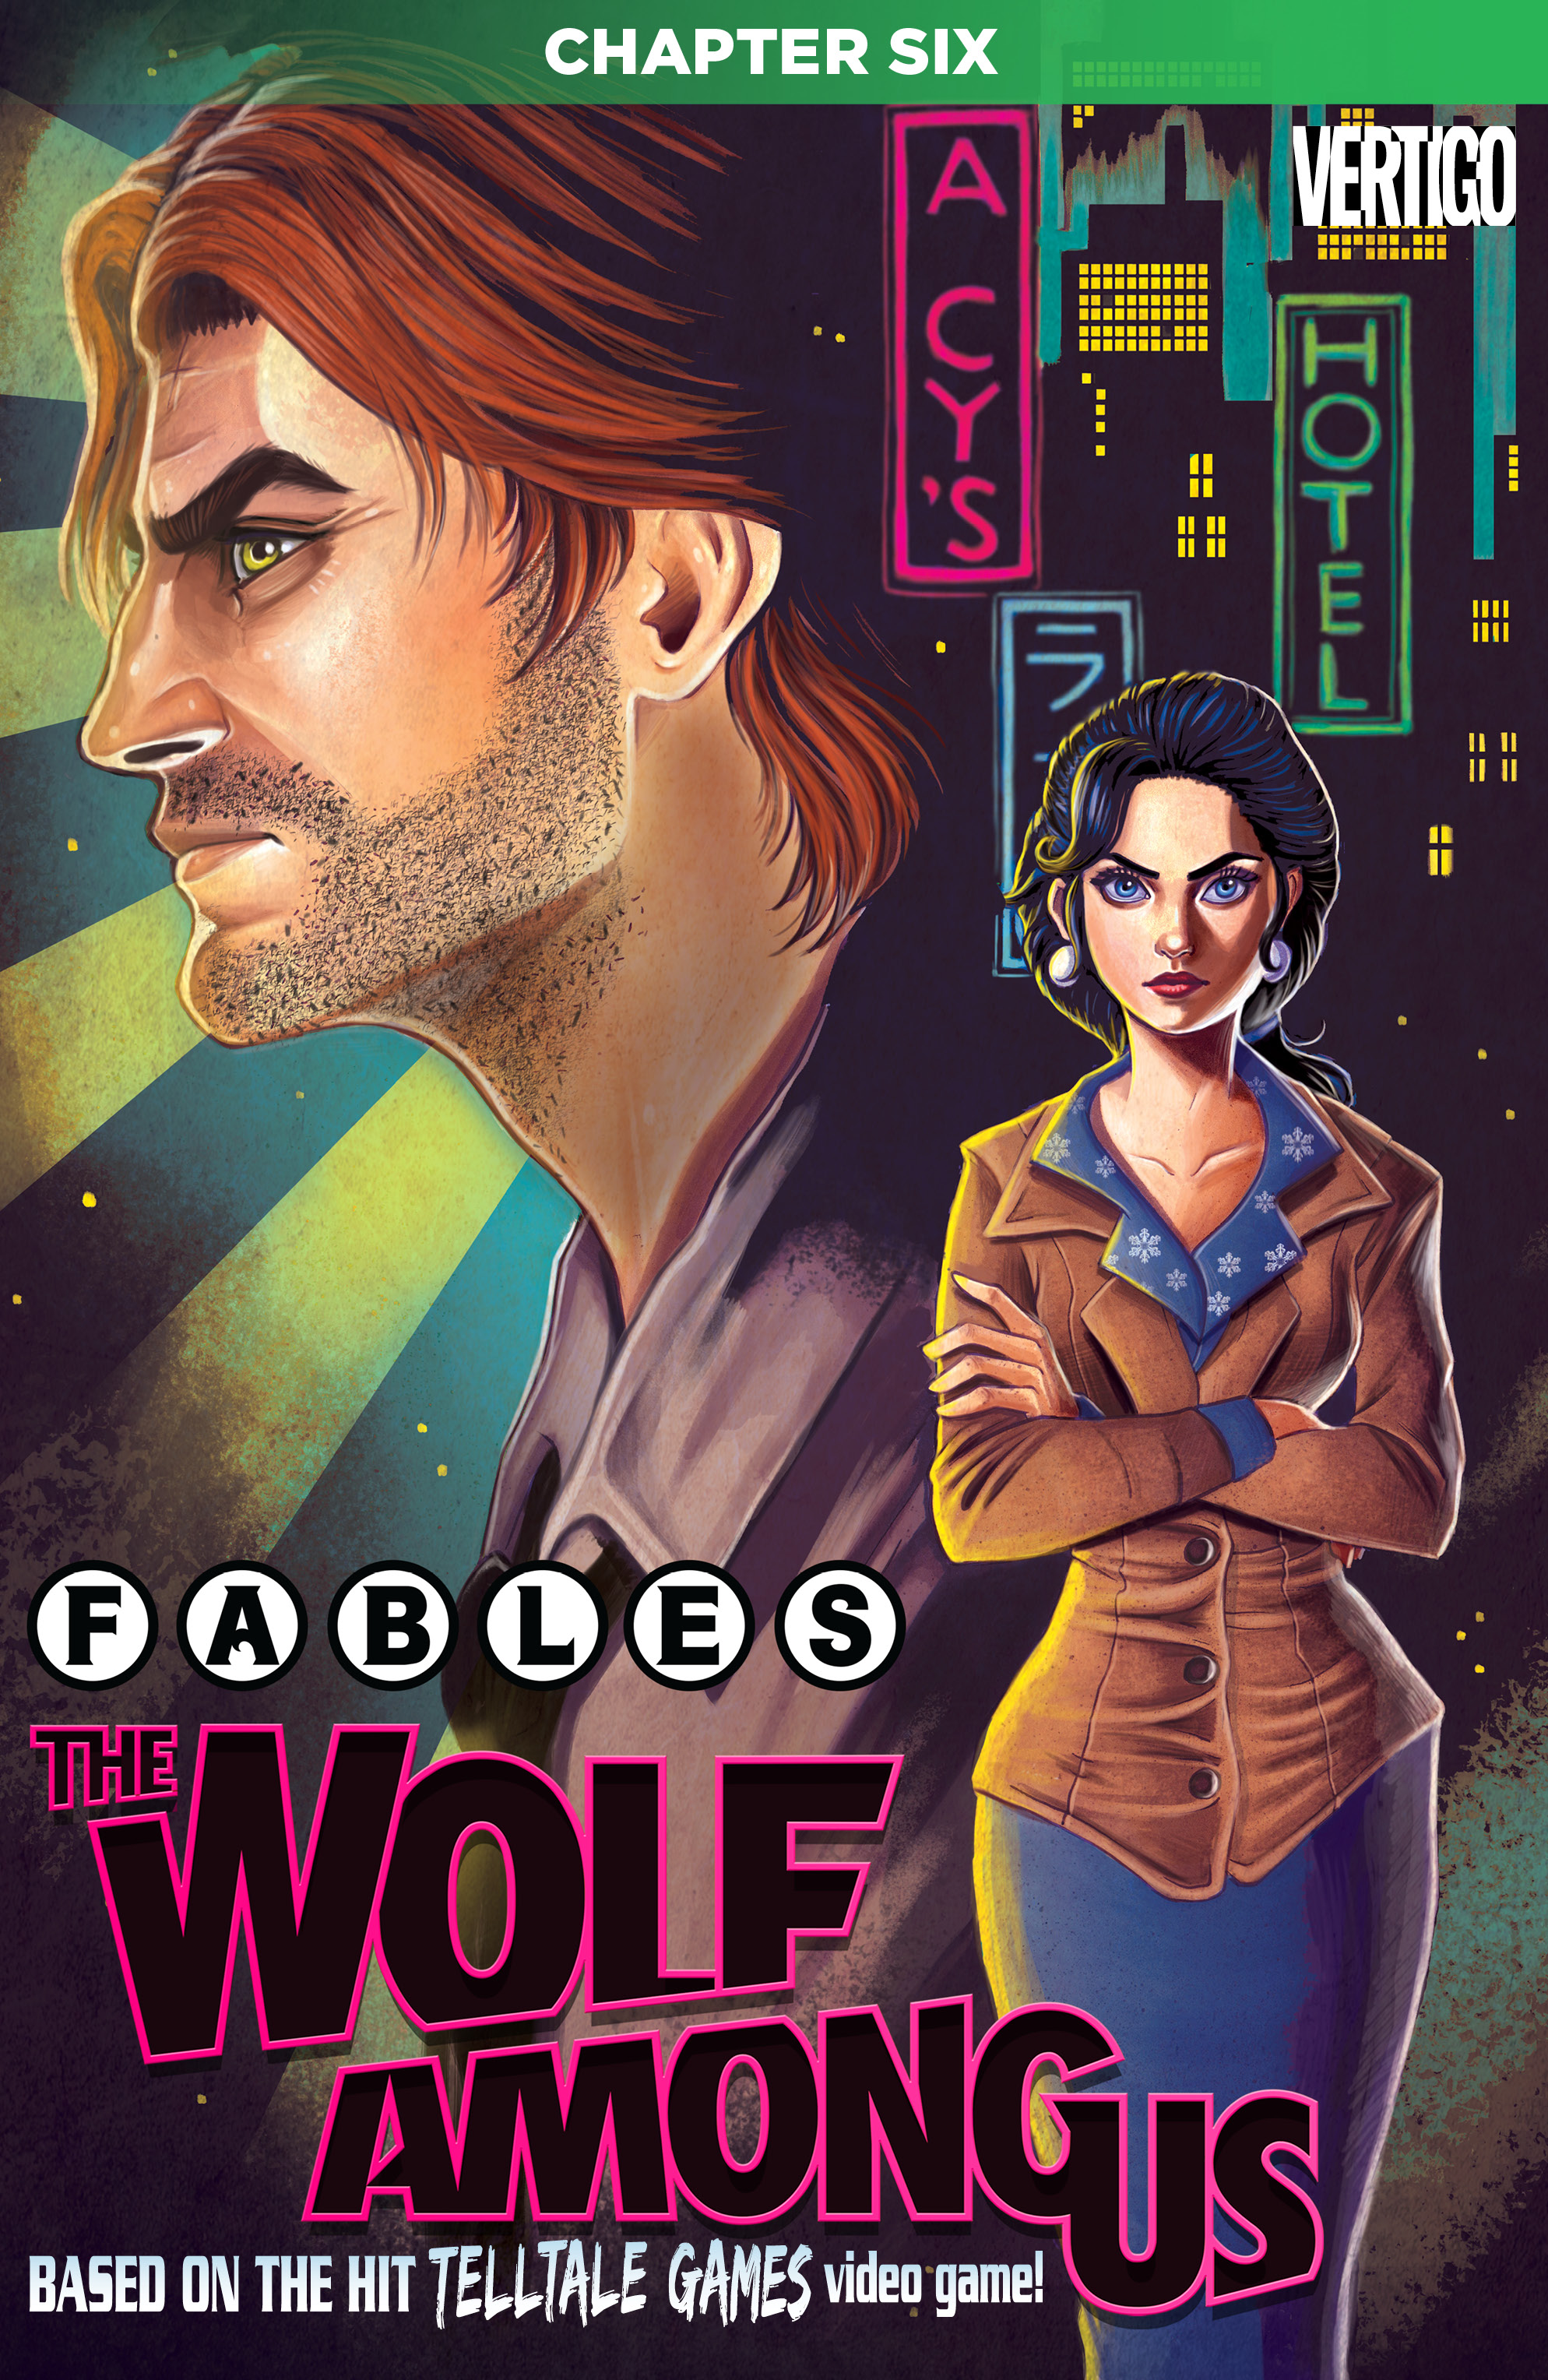 Fables: The Wolf Among Us #6 preview images